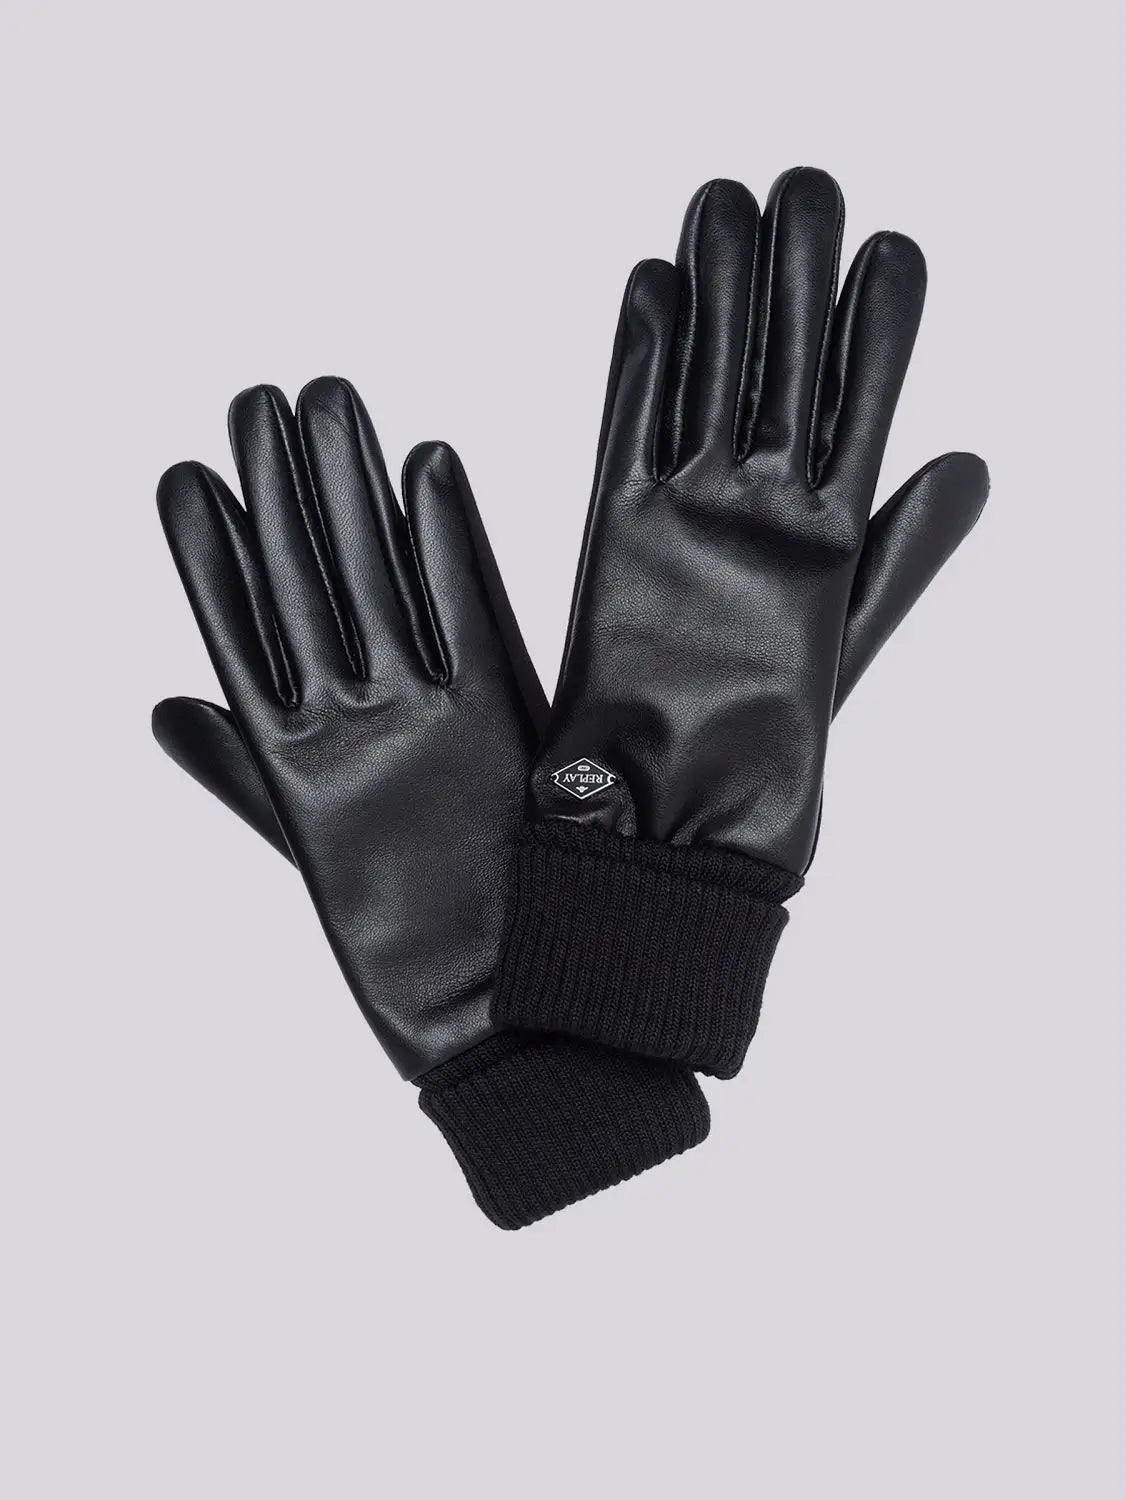 Replay Black Gloves Leather With Fabric Back